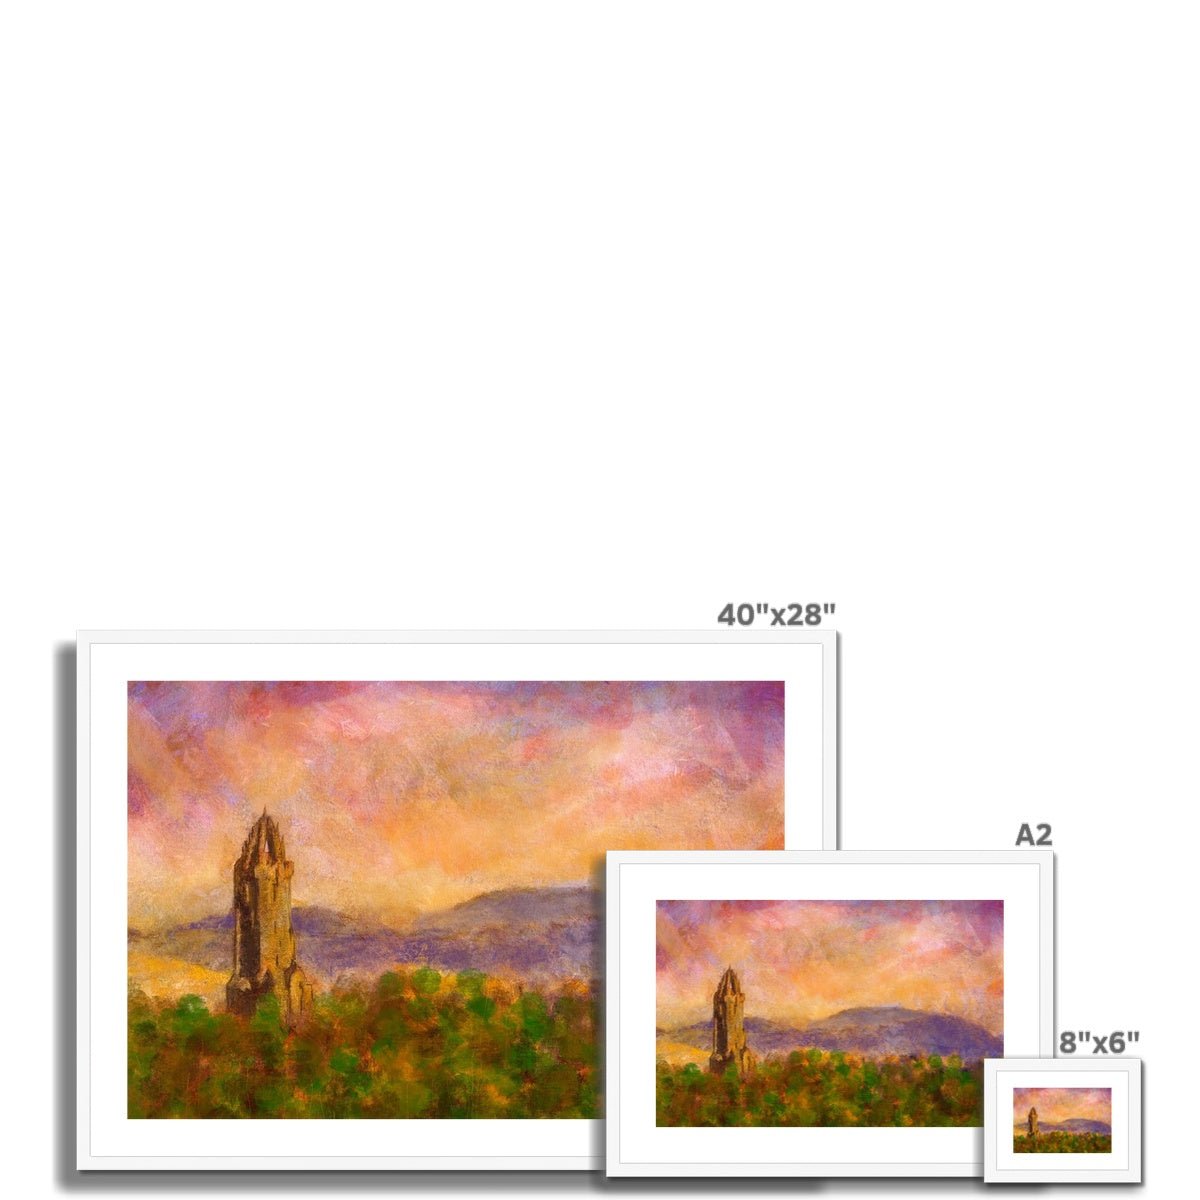 Wallace Monument Dusk Painting | Framed & Mounted Prints From Scotland-Framed & Mounted Prints-Historic & Iconic Scotland Art Gallery-Paintings, Prints, Homeware, Art Gifts From Scotland By Scottish Artist Kevin Hunter